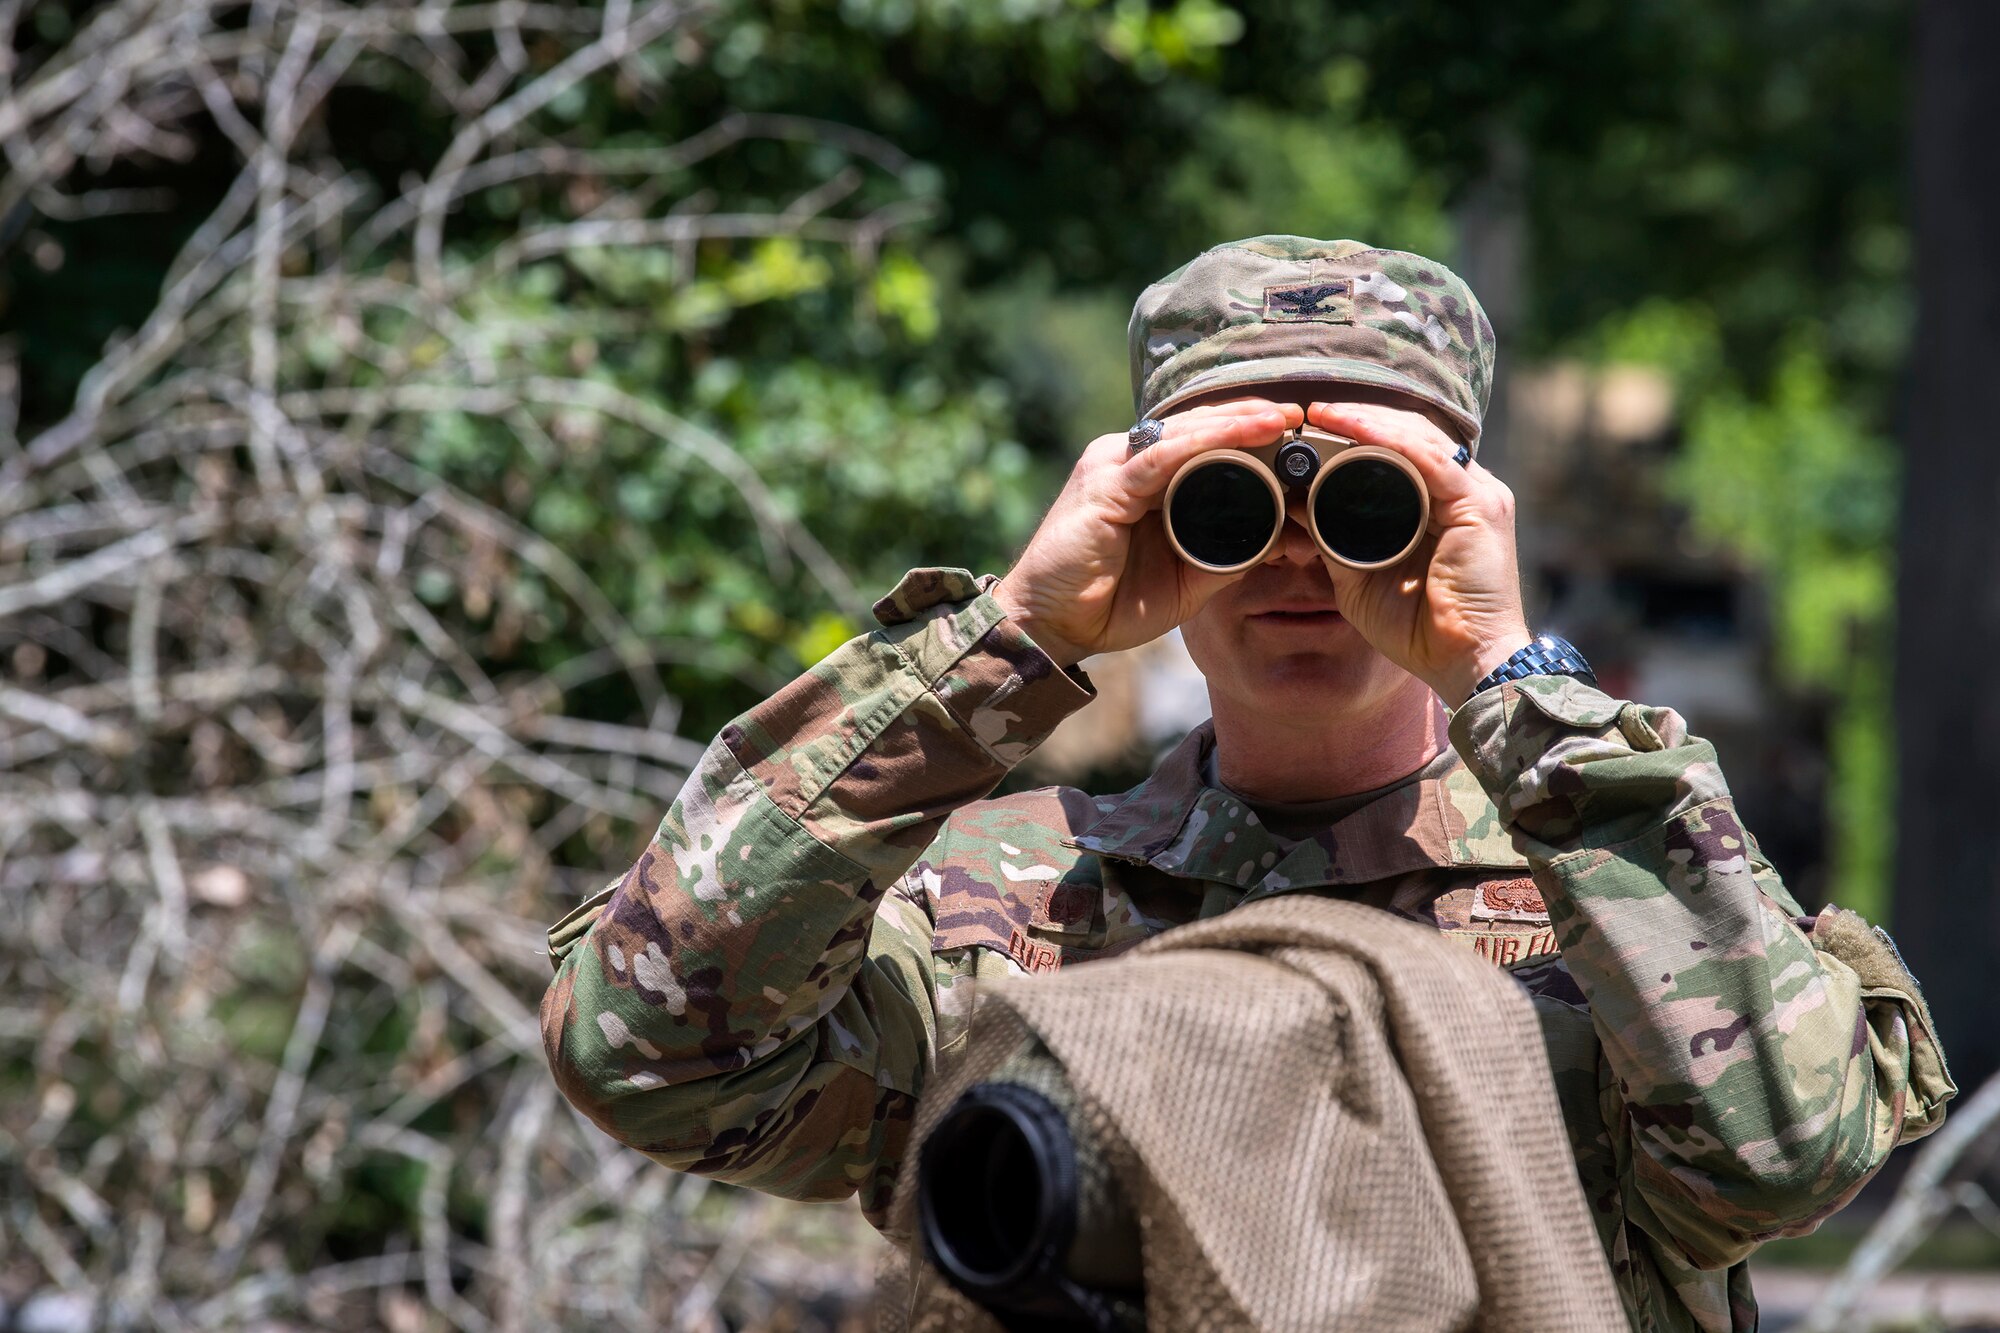 Col. Paul Birch, 93d Air Ground Operations Wing (AGOW) commander, looks through binoculars during an immersion tour, June 25, 2018, at Moody Air Force Base, Ga. Birch toured the 820th Base Defense Group to gain a better understanding of their overall mission, duties and comprehensive capabilities. Prior to taking command of the 93d AGOW, Birch was the commander of the 380th Expeditionary Operations Group at Al Dhafra Air Base, United Arab Emirates. (U.S. Air Force photo by Airman 1st Class Eugene Oliver)